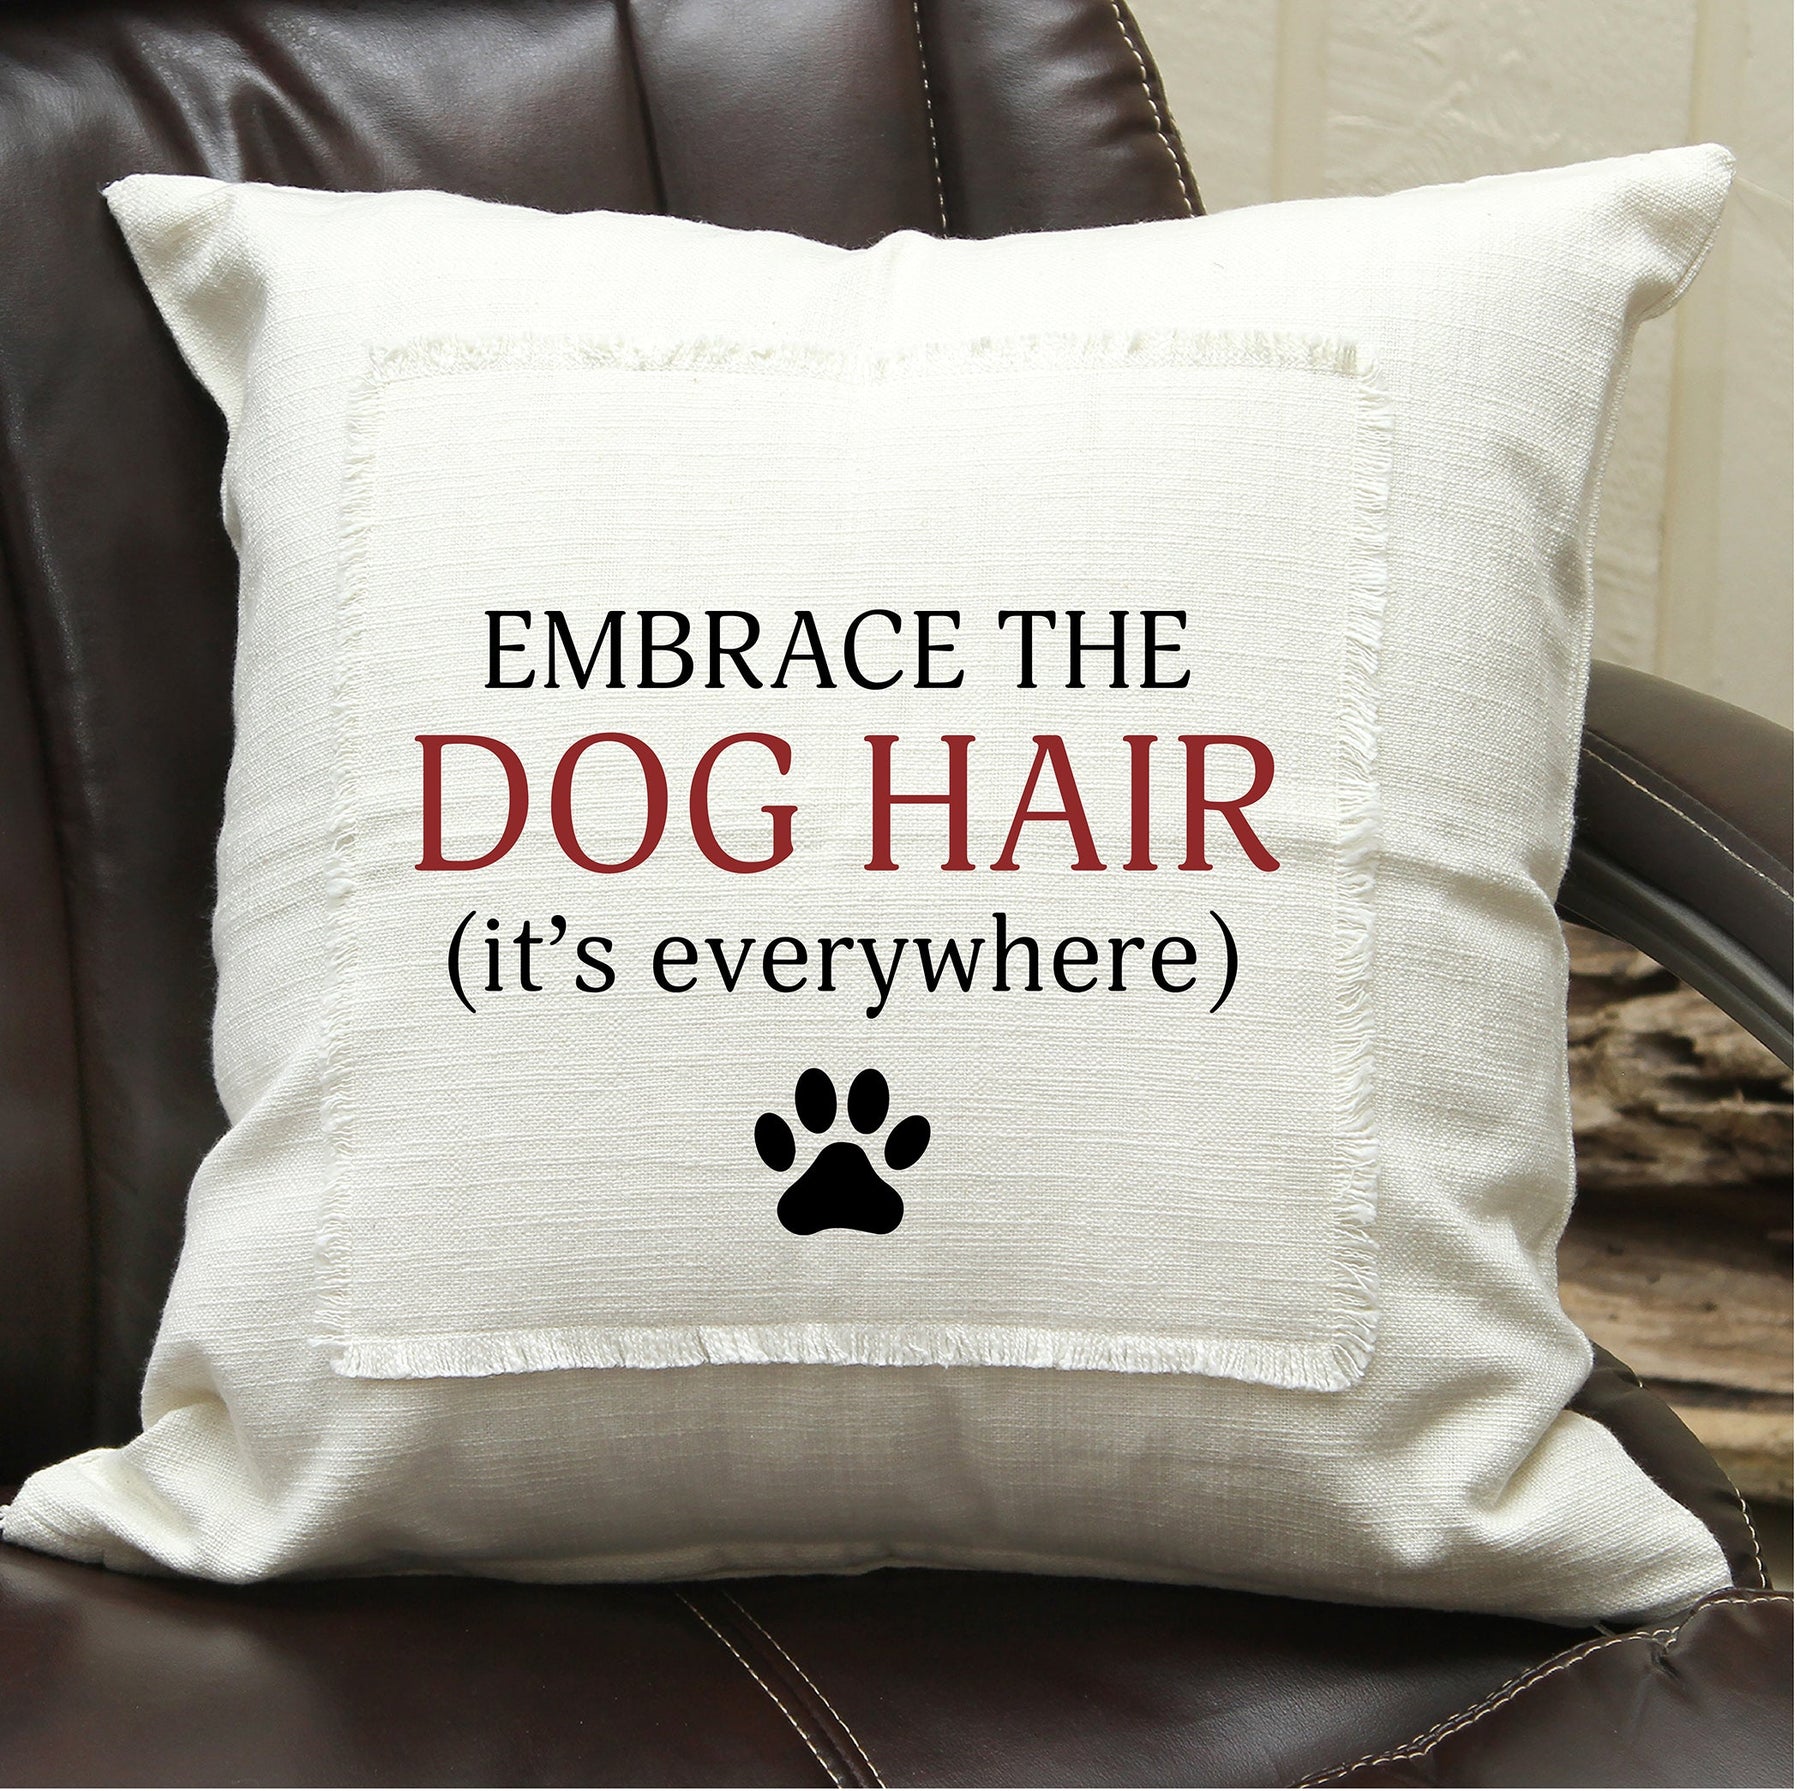 Embrace the Dog Hair (it's everywhere) Pillow Cover